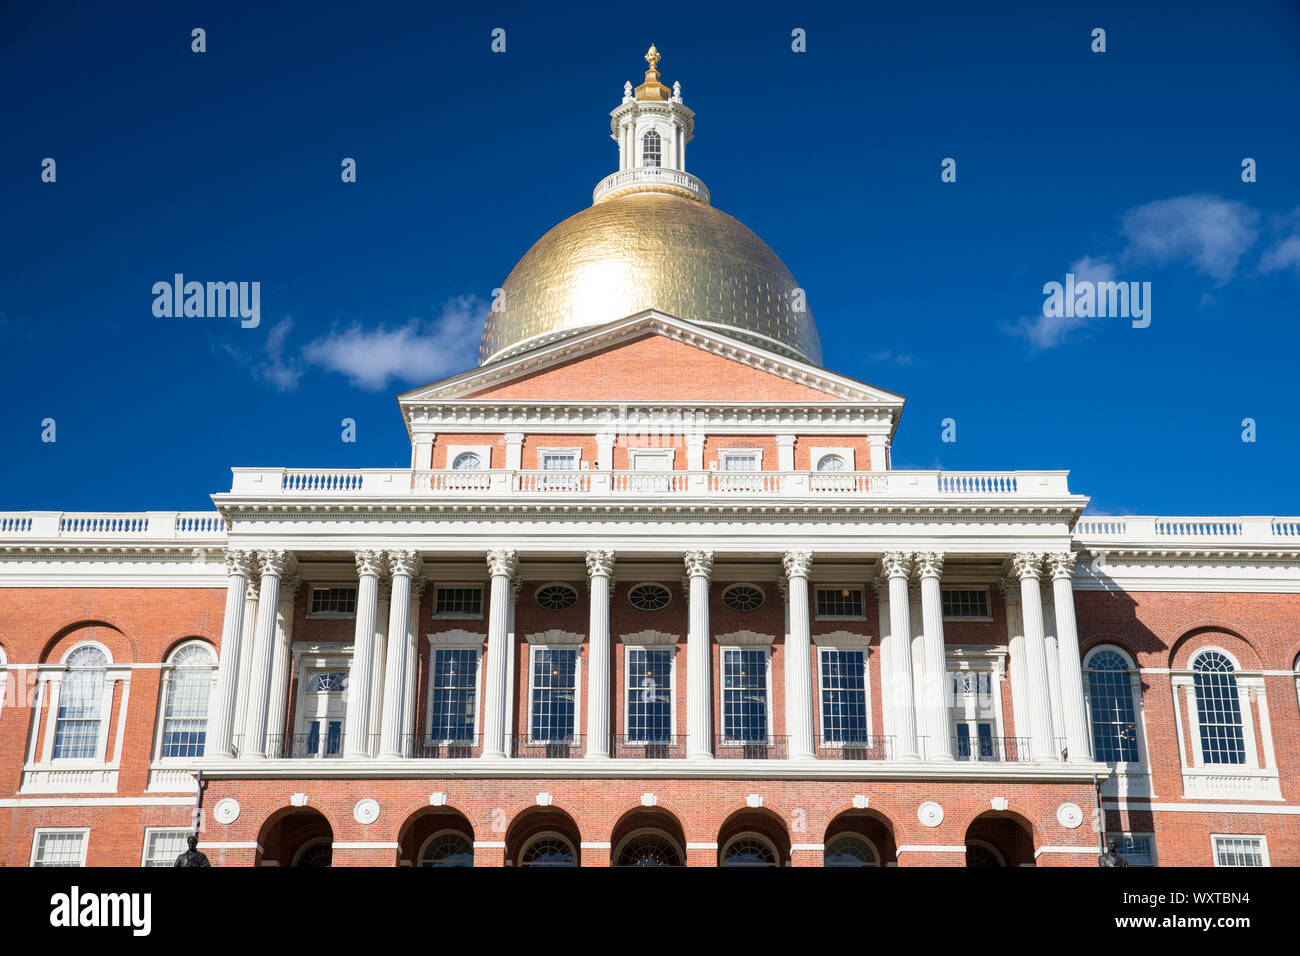 Massachusetts State House the seat of Government, with golden dome and columns in the city of Boston, USA Stock Photo